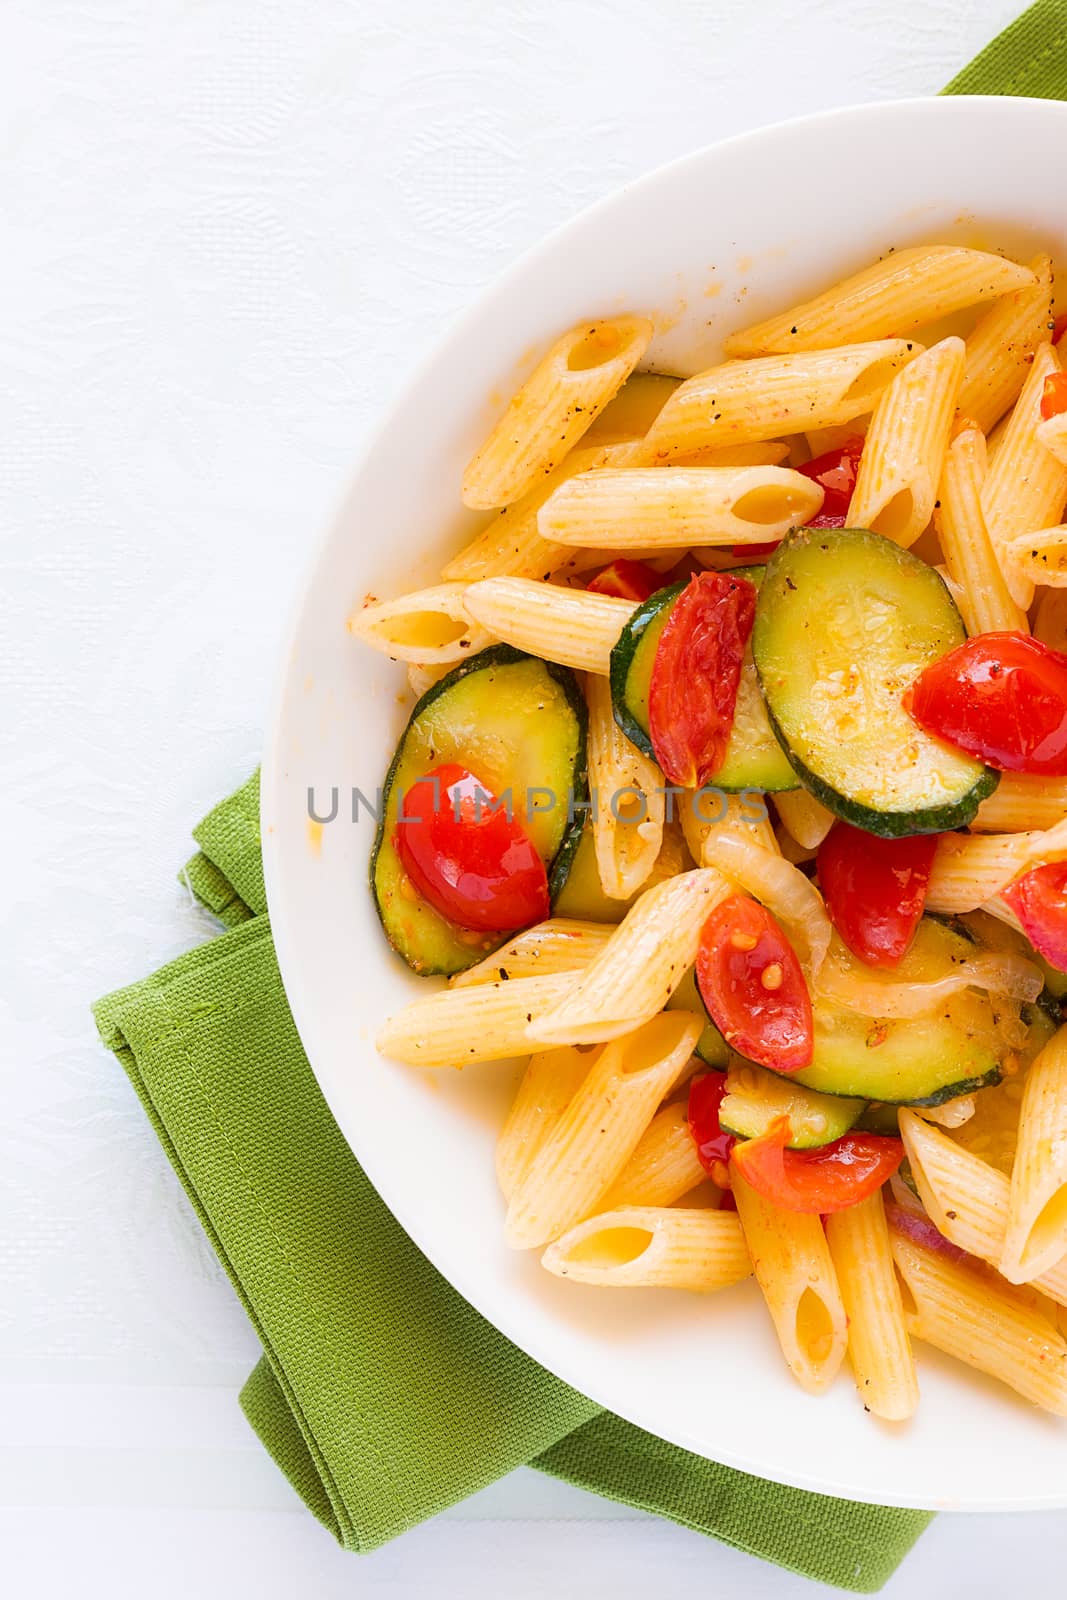 Italian penne pasta with zucchini and cherry tomatoes by LuigiMorbidelli